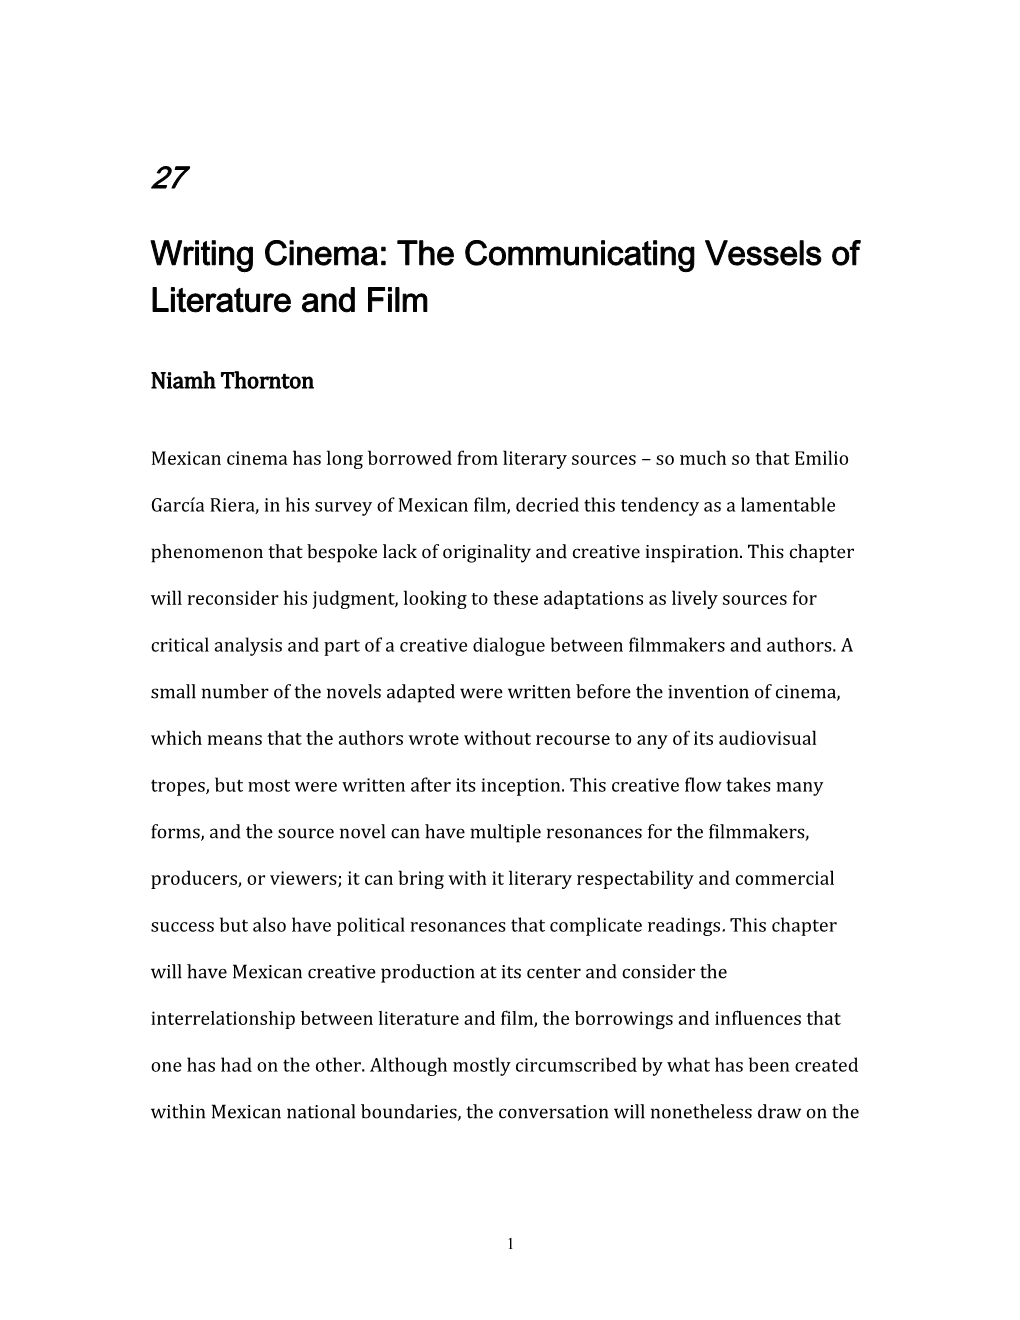 Writing Cinema: the Communicating Vessels of Literature and Film